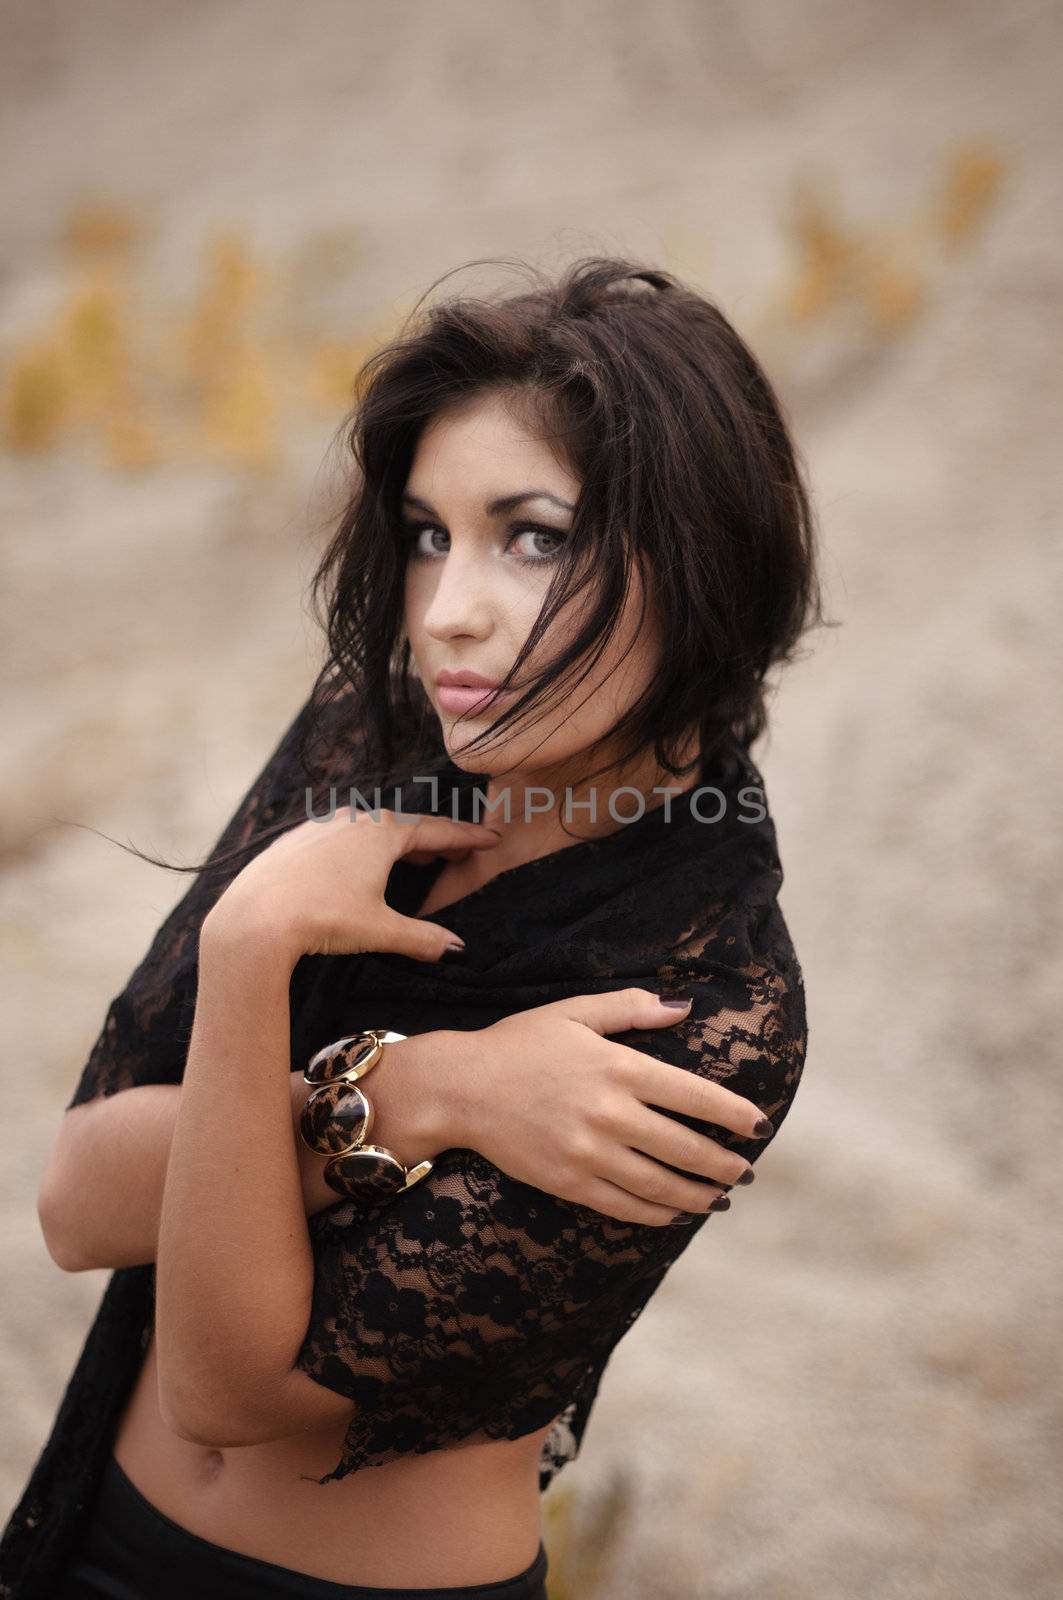 Woman in black lacy shawl looking sideways at the camera with serious expression, outdoor portrait.